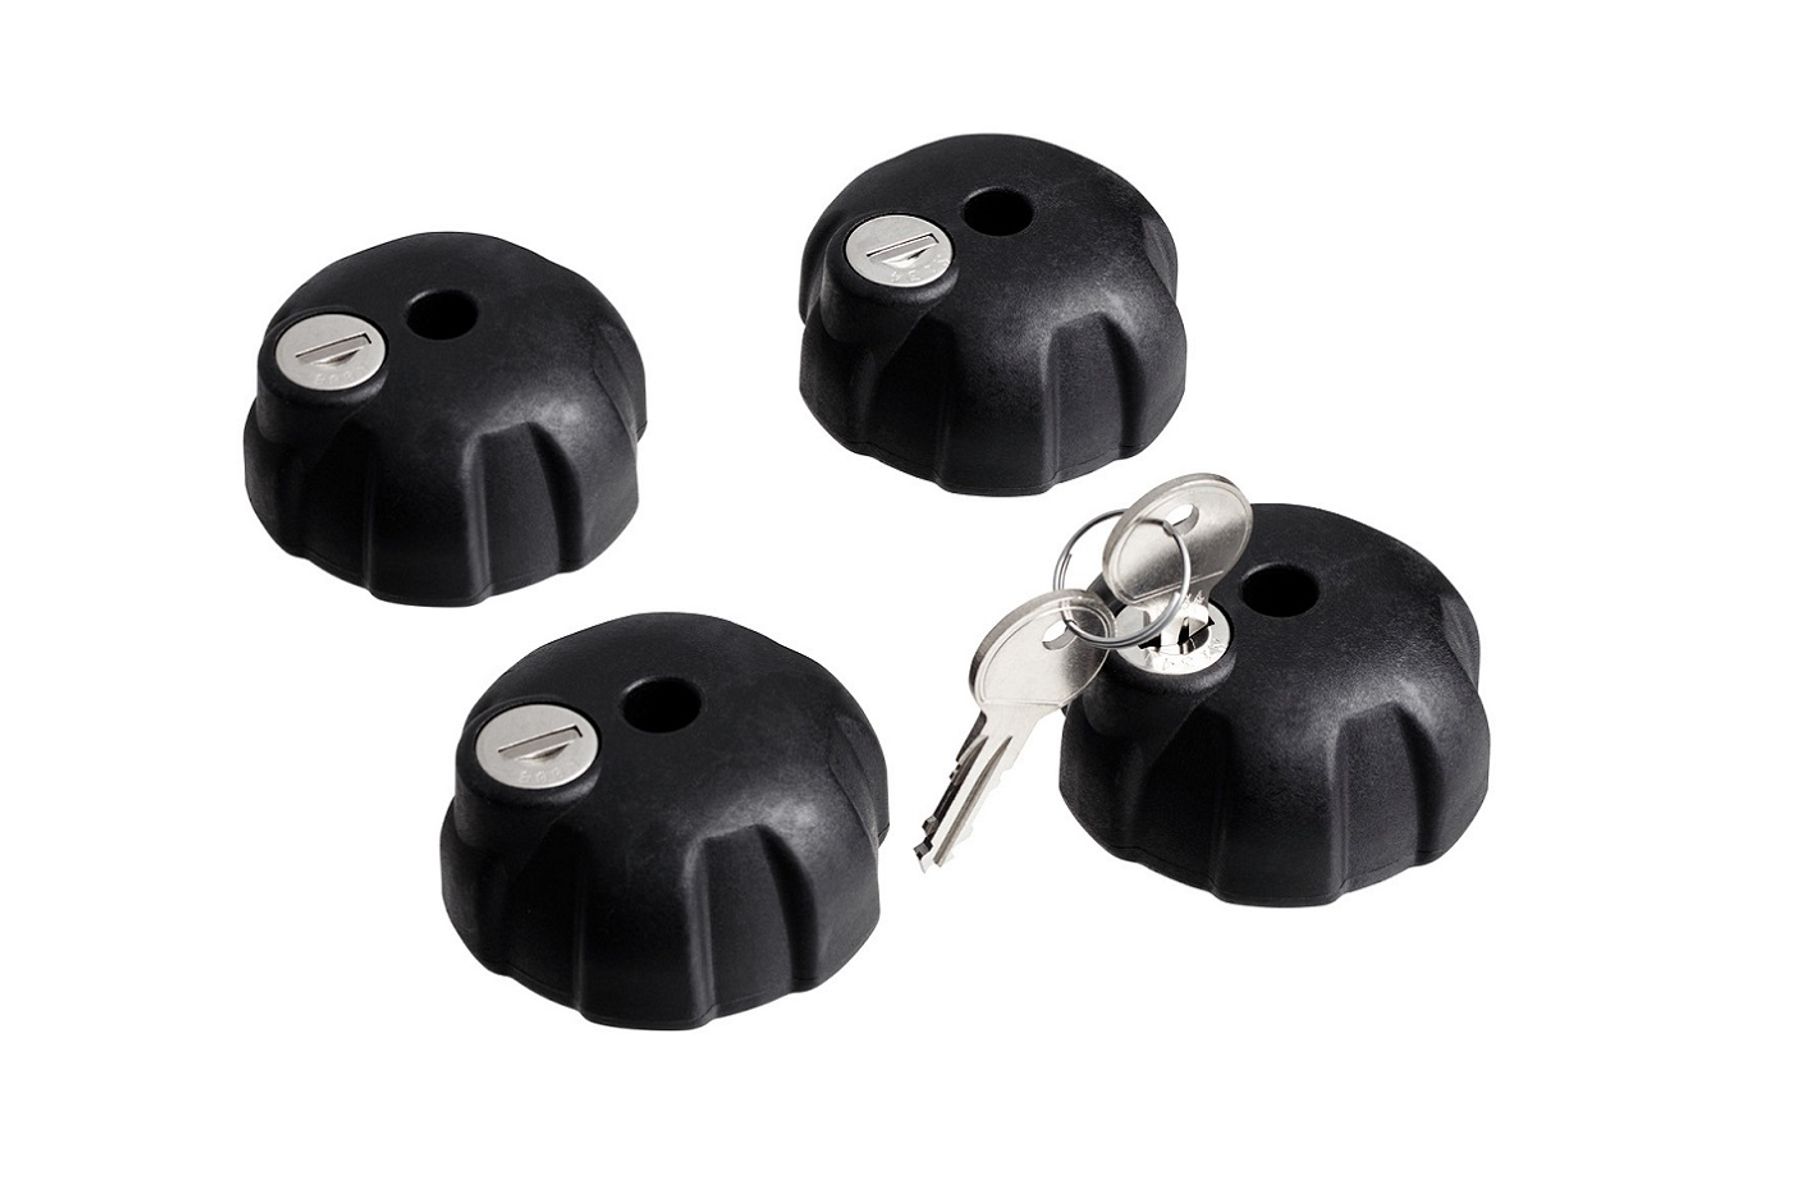 4 knobs with lock for bike holder to secure your bikes